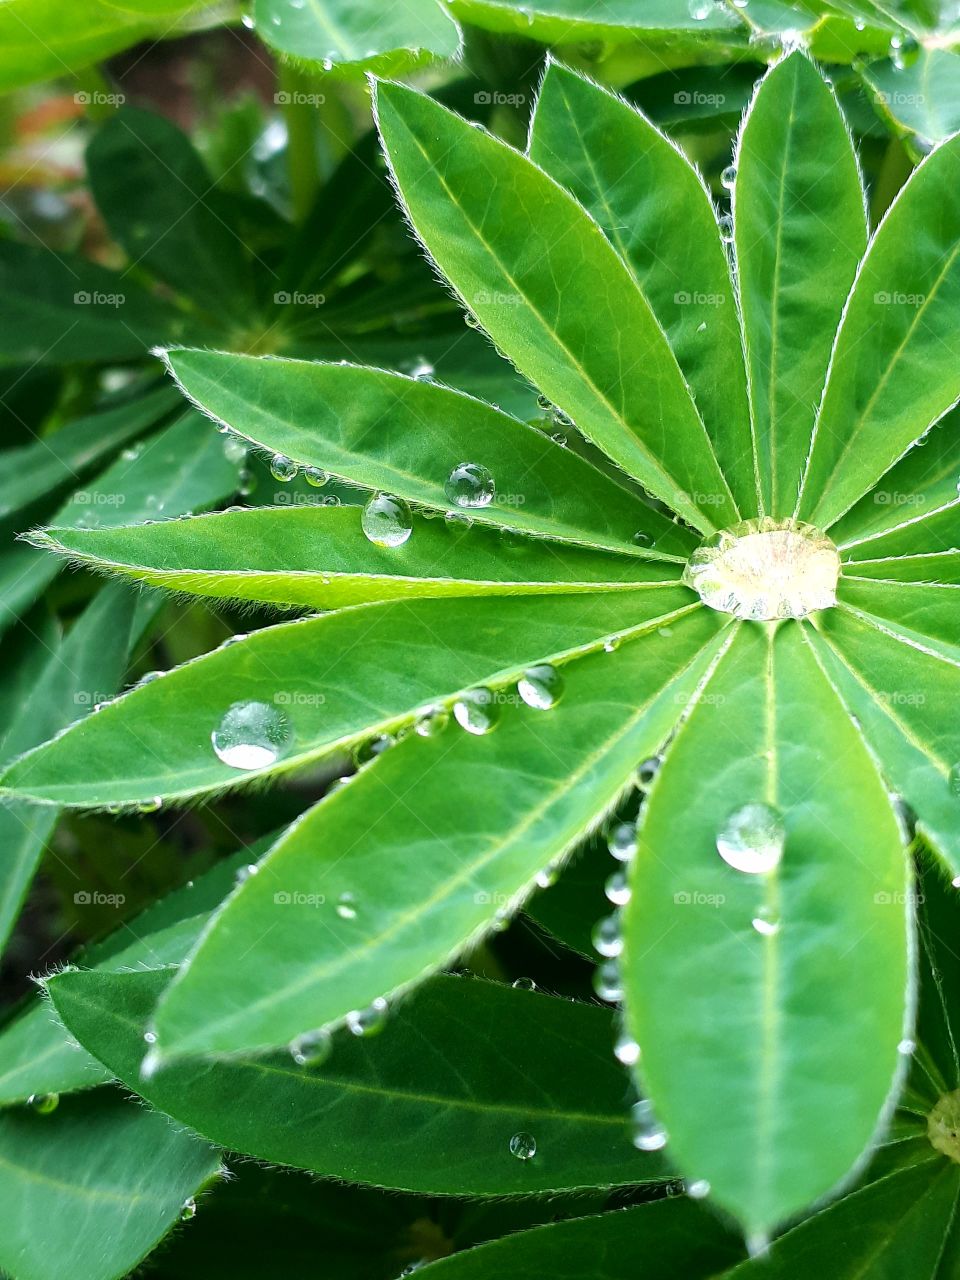 Drops of water on leaves of grass and plants after rain